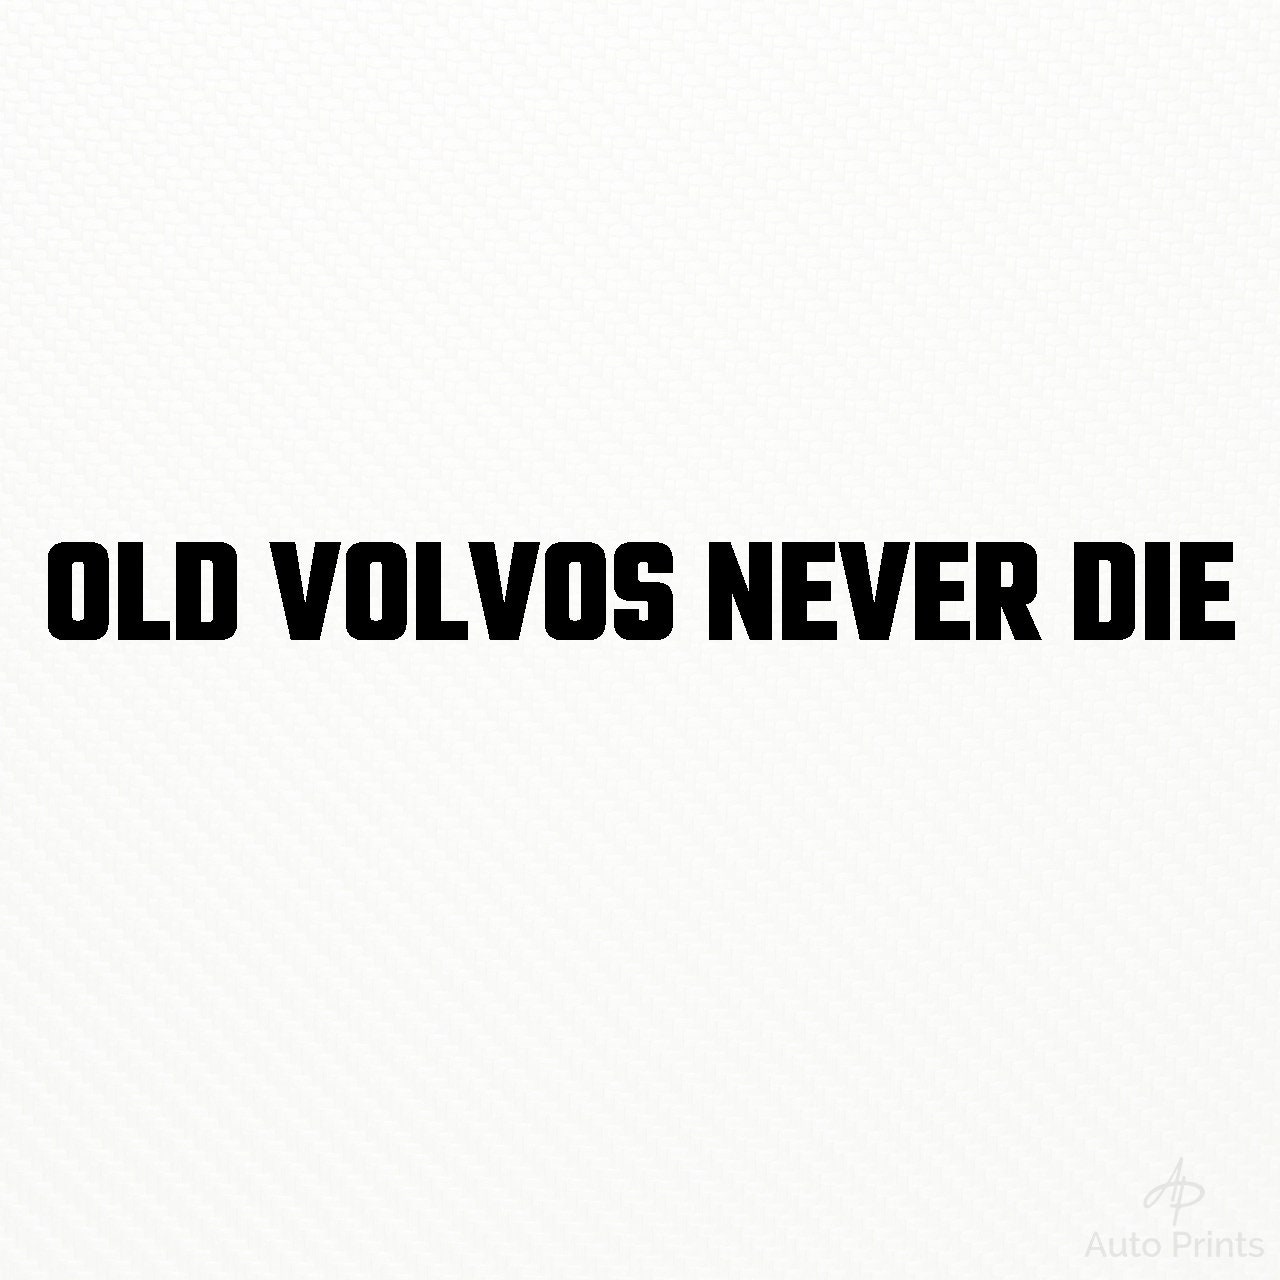 Old Volvos Never Die Vinyl Decal Volvo Funny Sticker Drift Rally Dub Stance Classic  Car Slap Swede Swedish the Volv 240 740 Wagen 